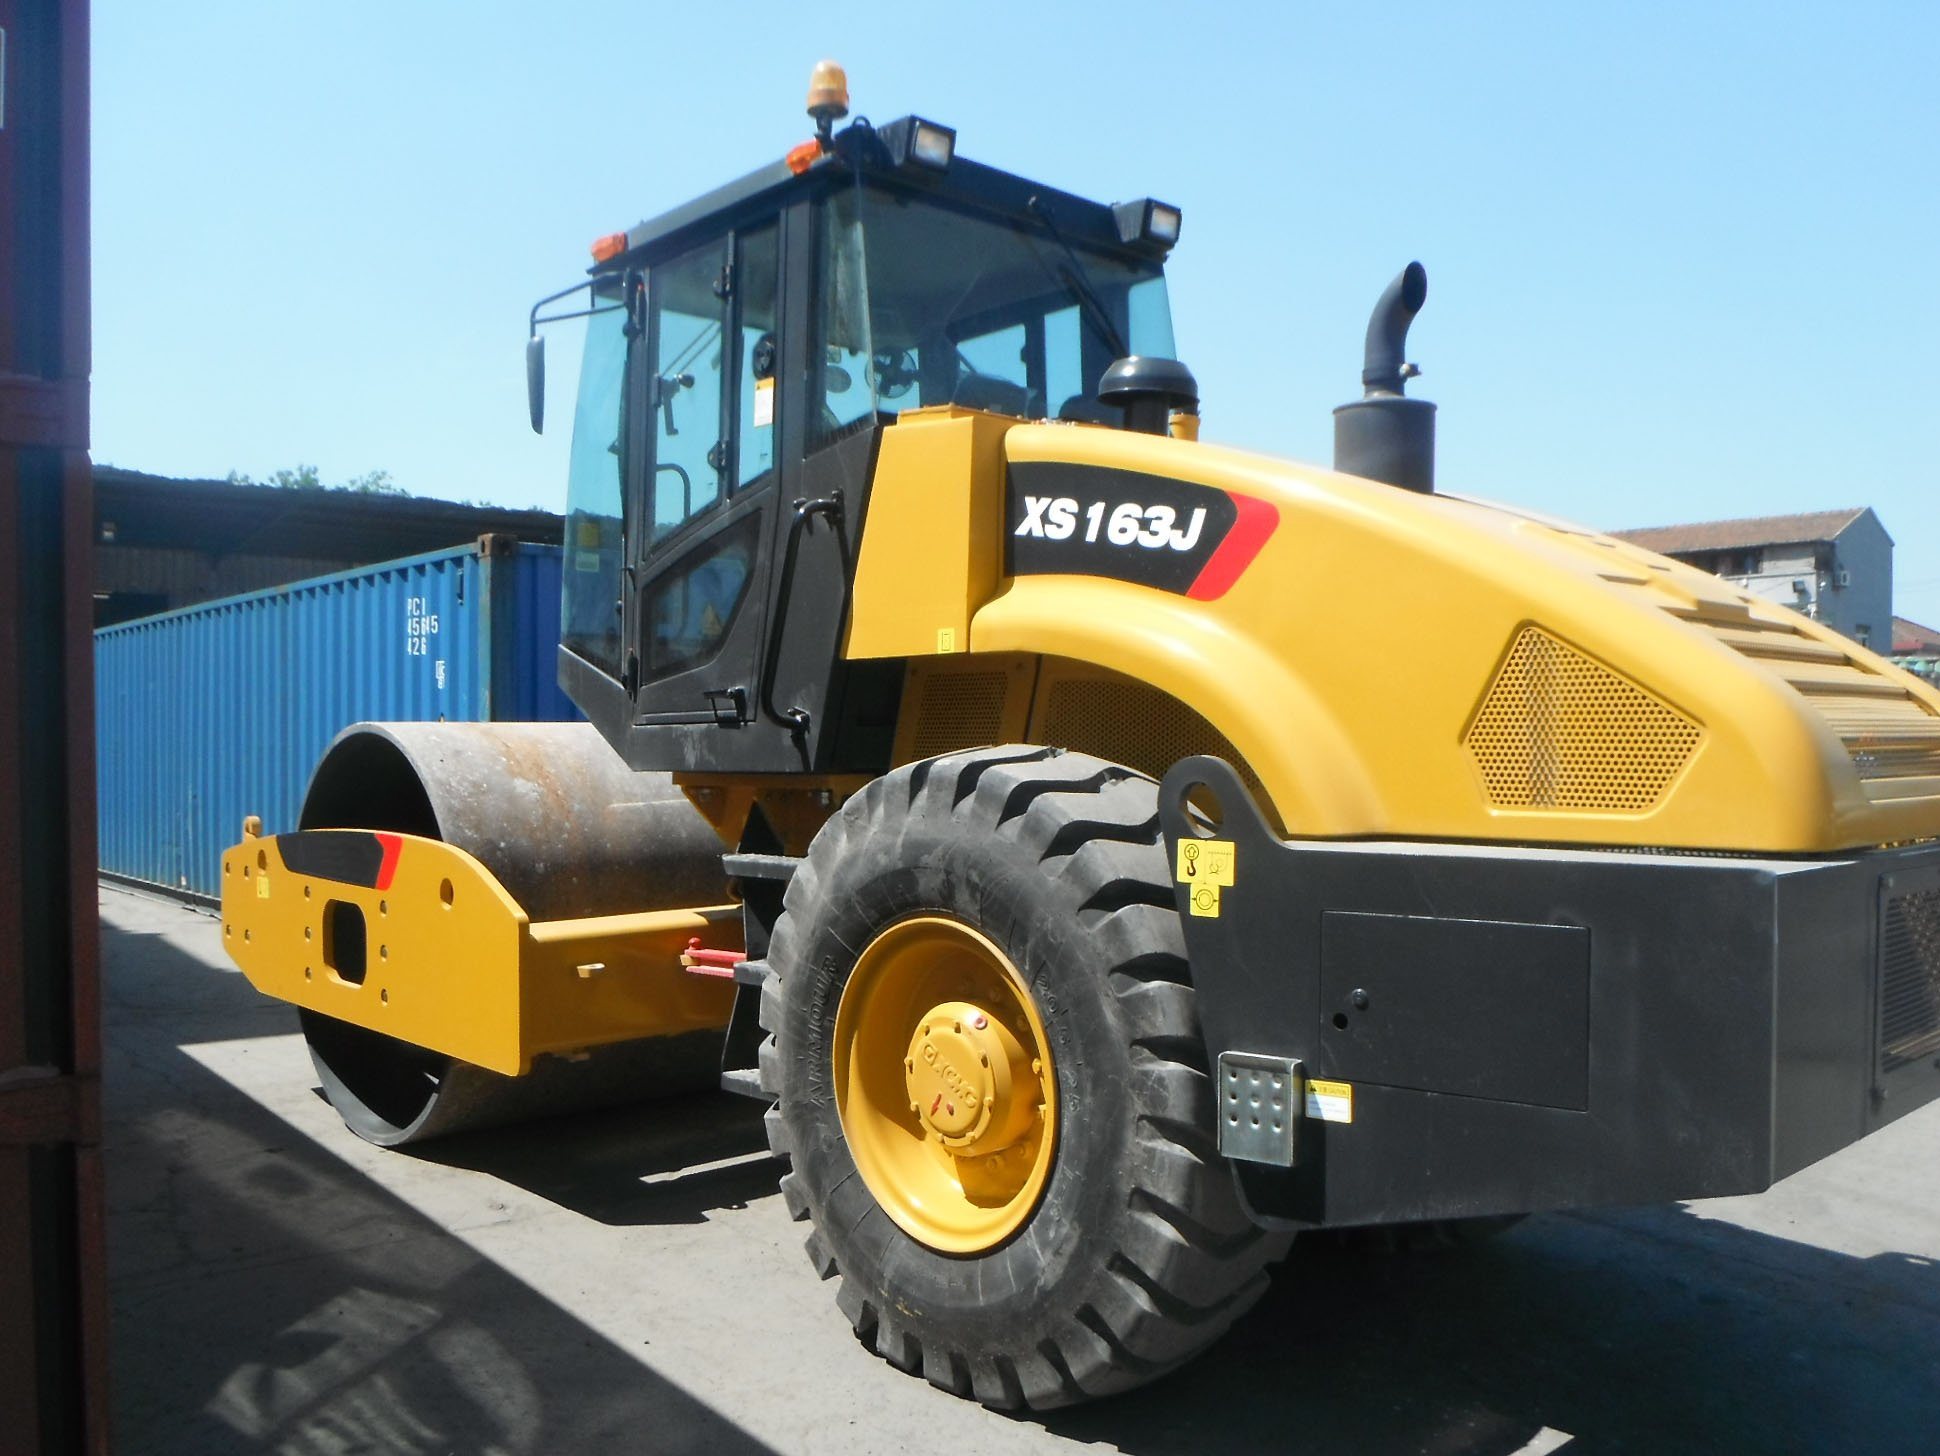 16 Ton Single Drum Road Roller Xs163j with Competitive Price